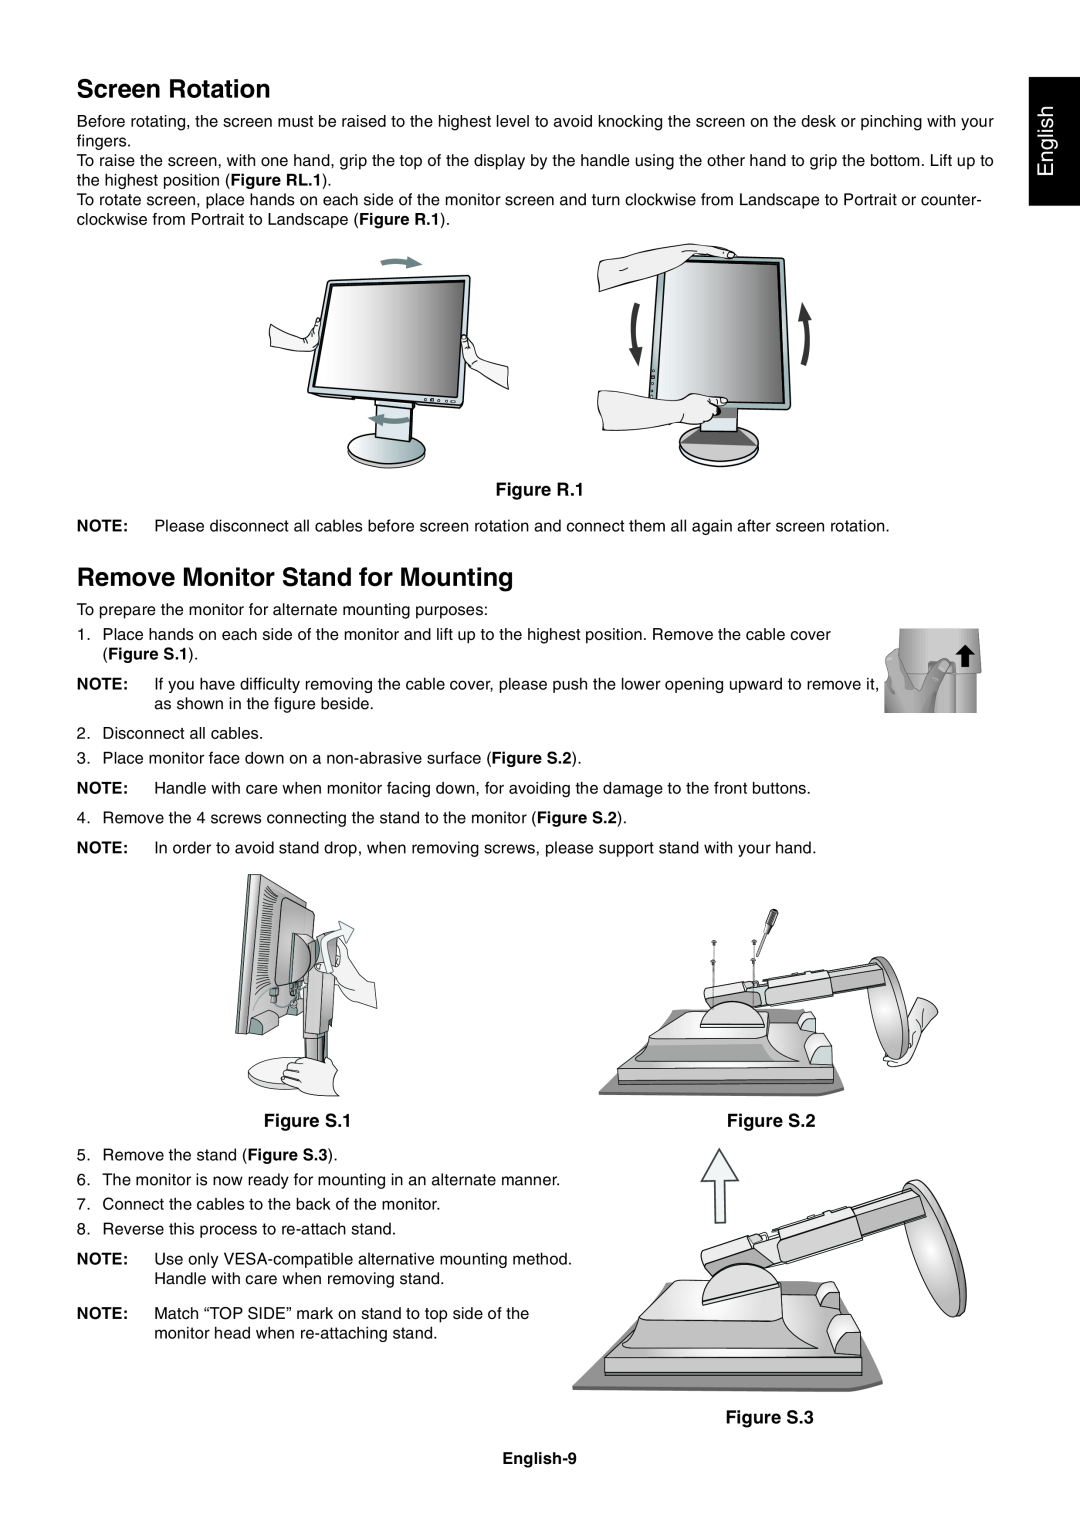 NEC EA191M-BK Screen Rotation, Remove Monitor Stand for Mounting, English, Figure R.1, Figure S.1, Figure S.2, Figure S.3 